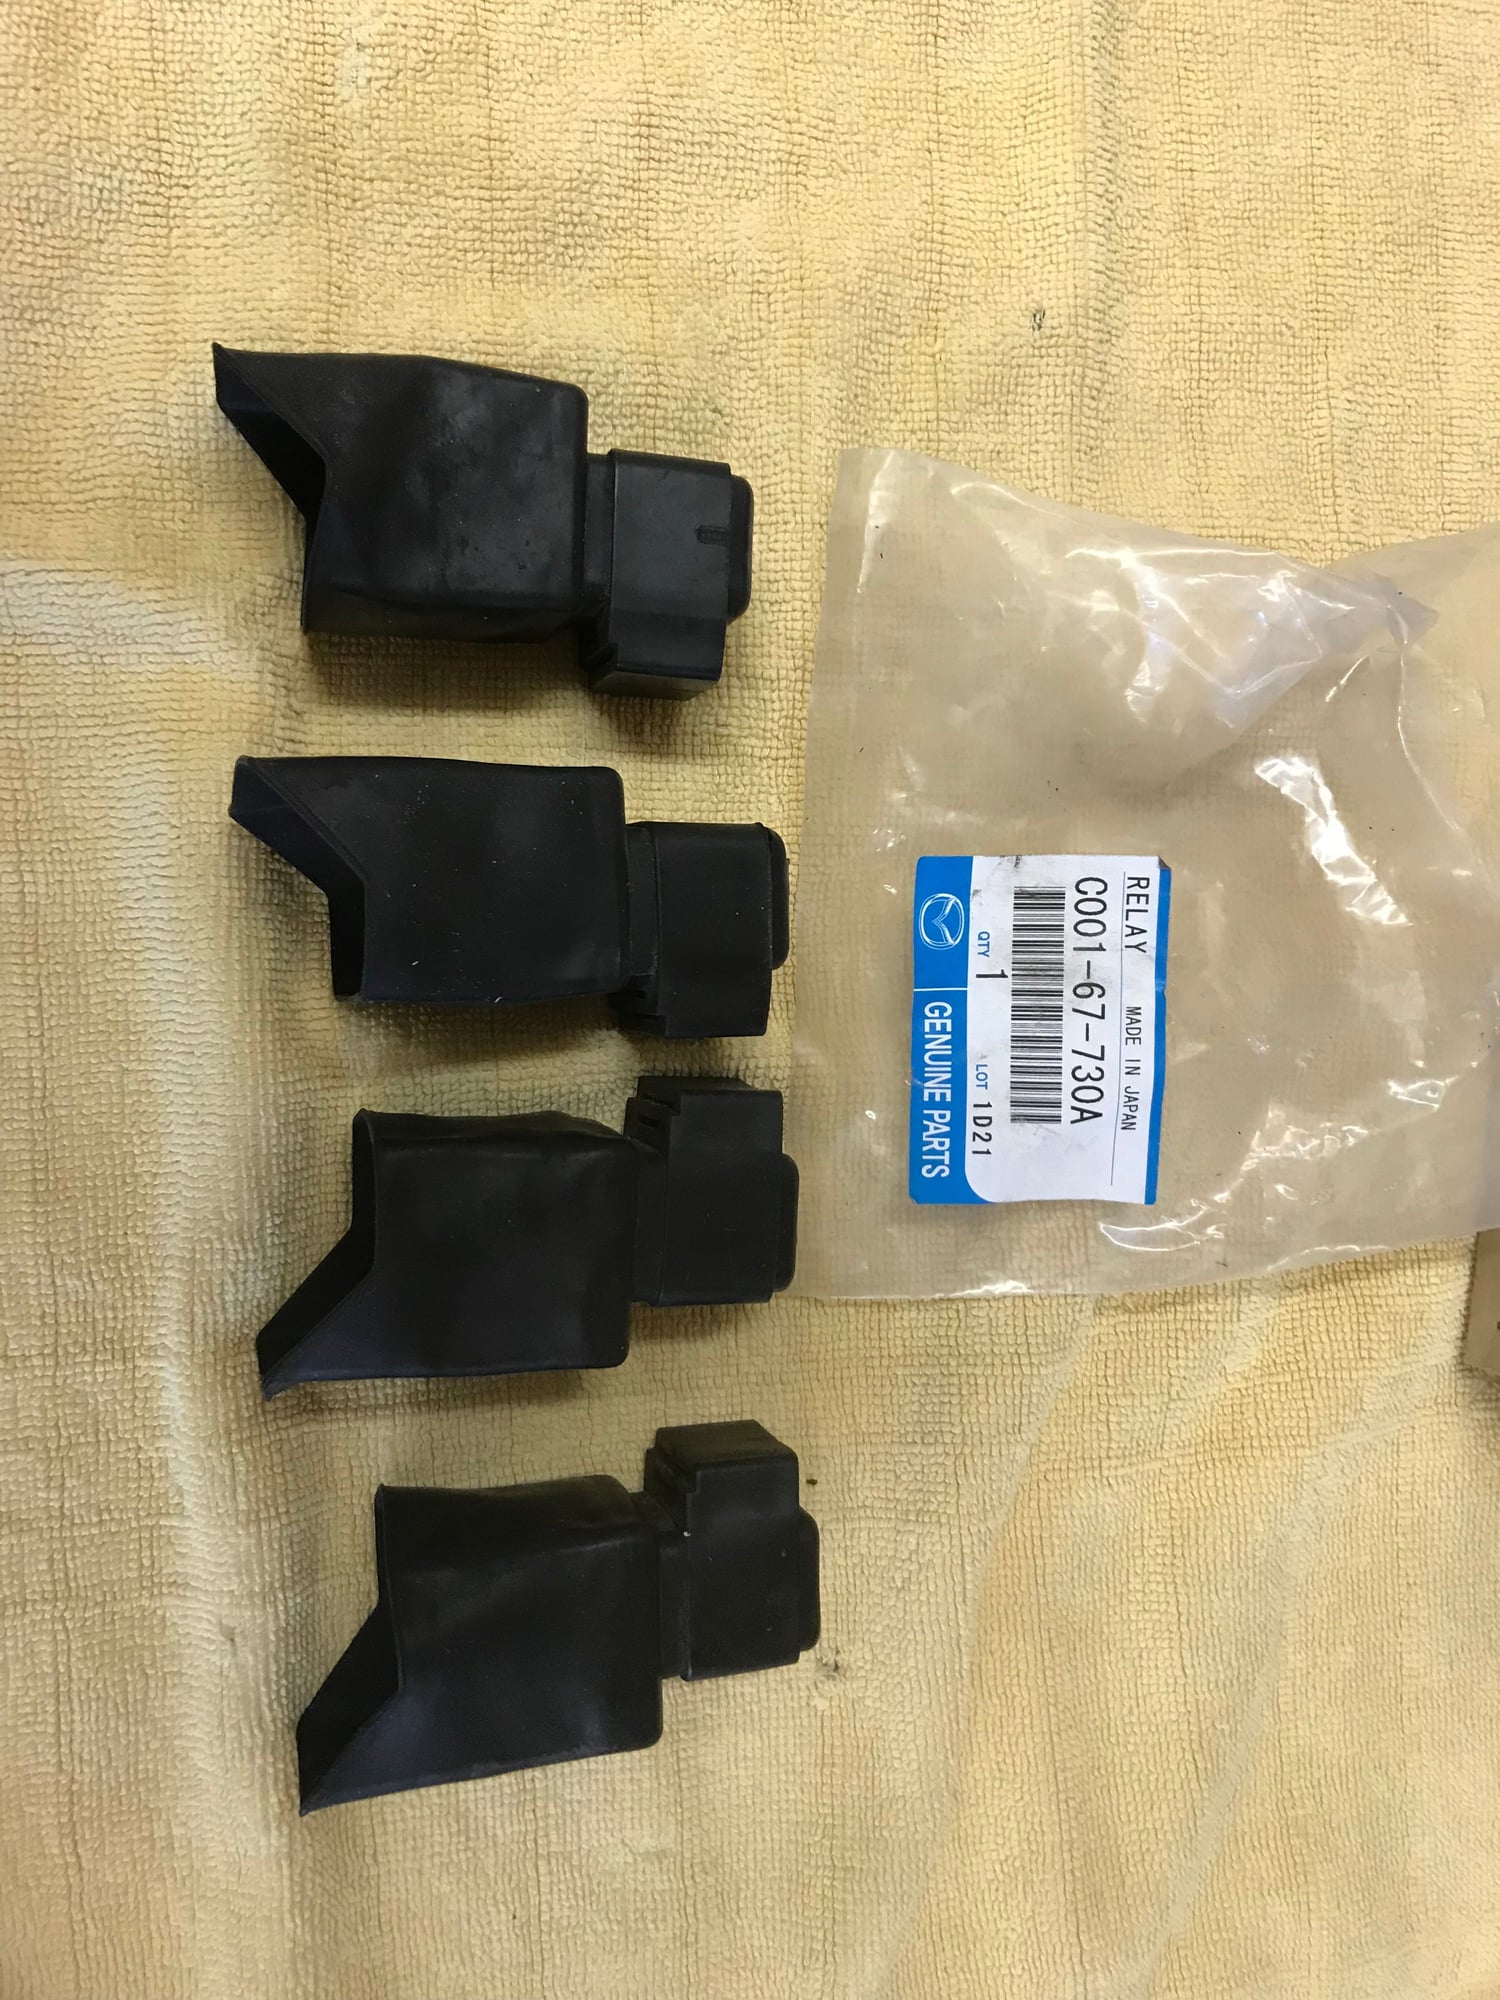 Engine - Intake/Fuel - CRV, BOV, cooling fan relays from 37K mile FD - Used - 1993 to 2002 Mazda RX-7 - Rancho Santa Margarita, CA 92688, United States